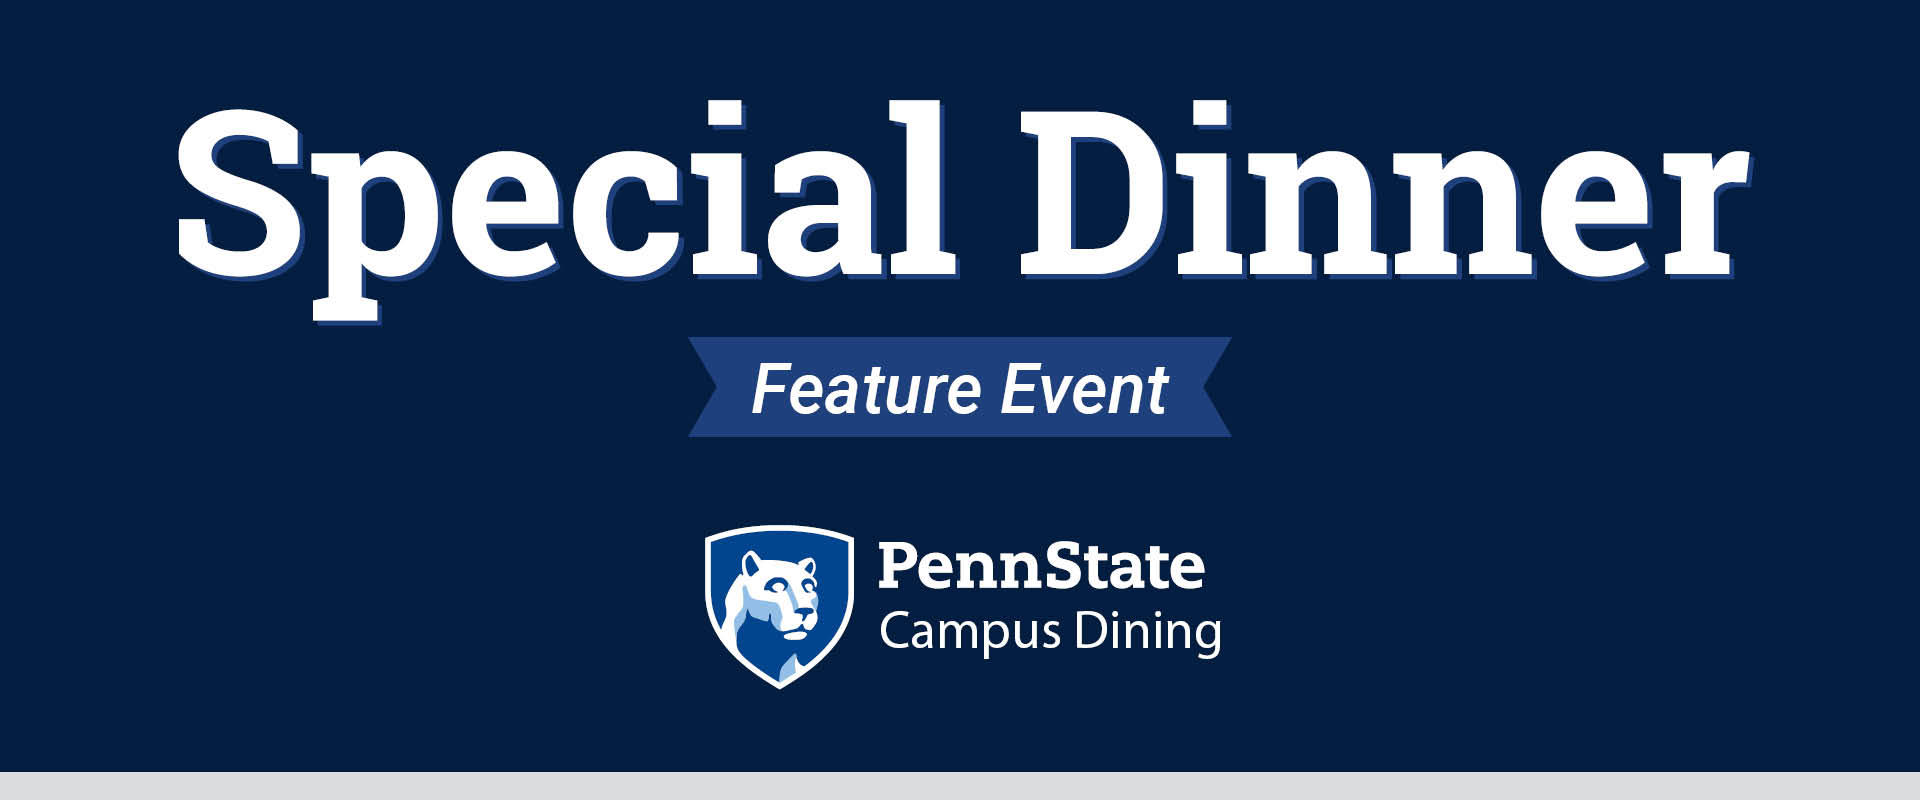 Special Dinner: Feature Event